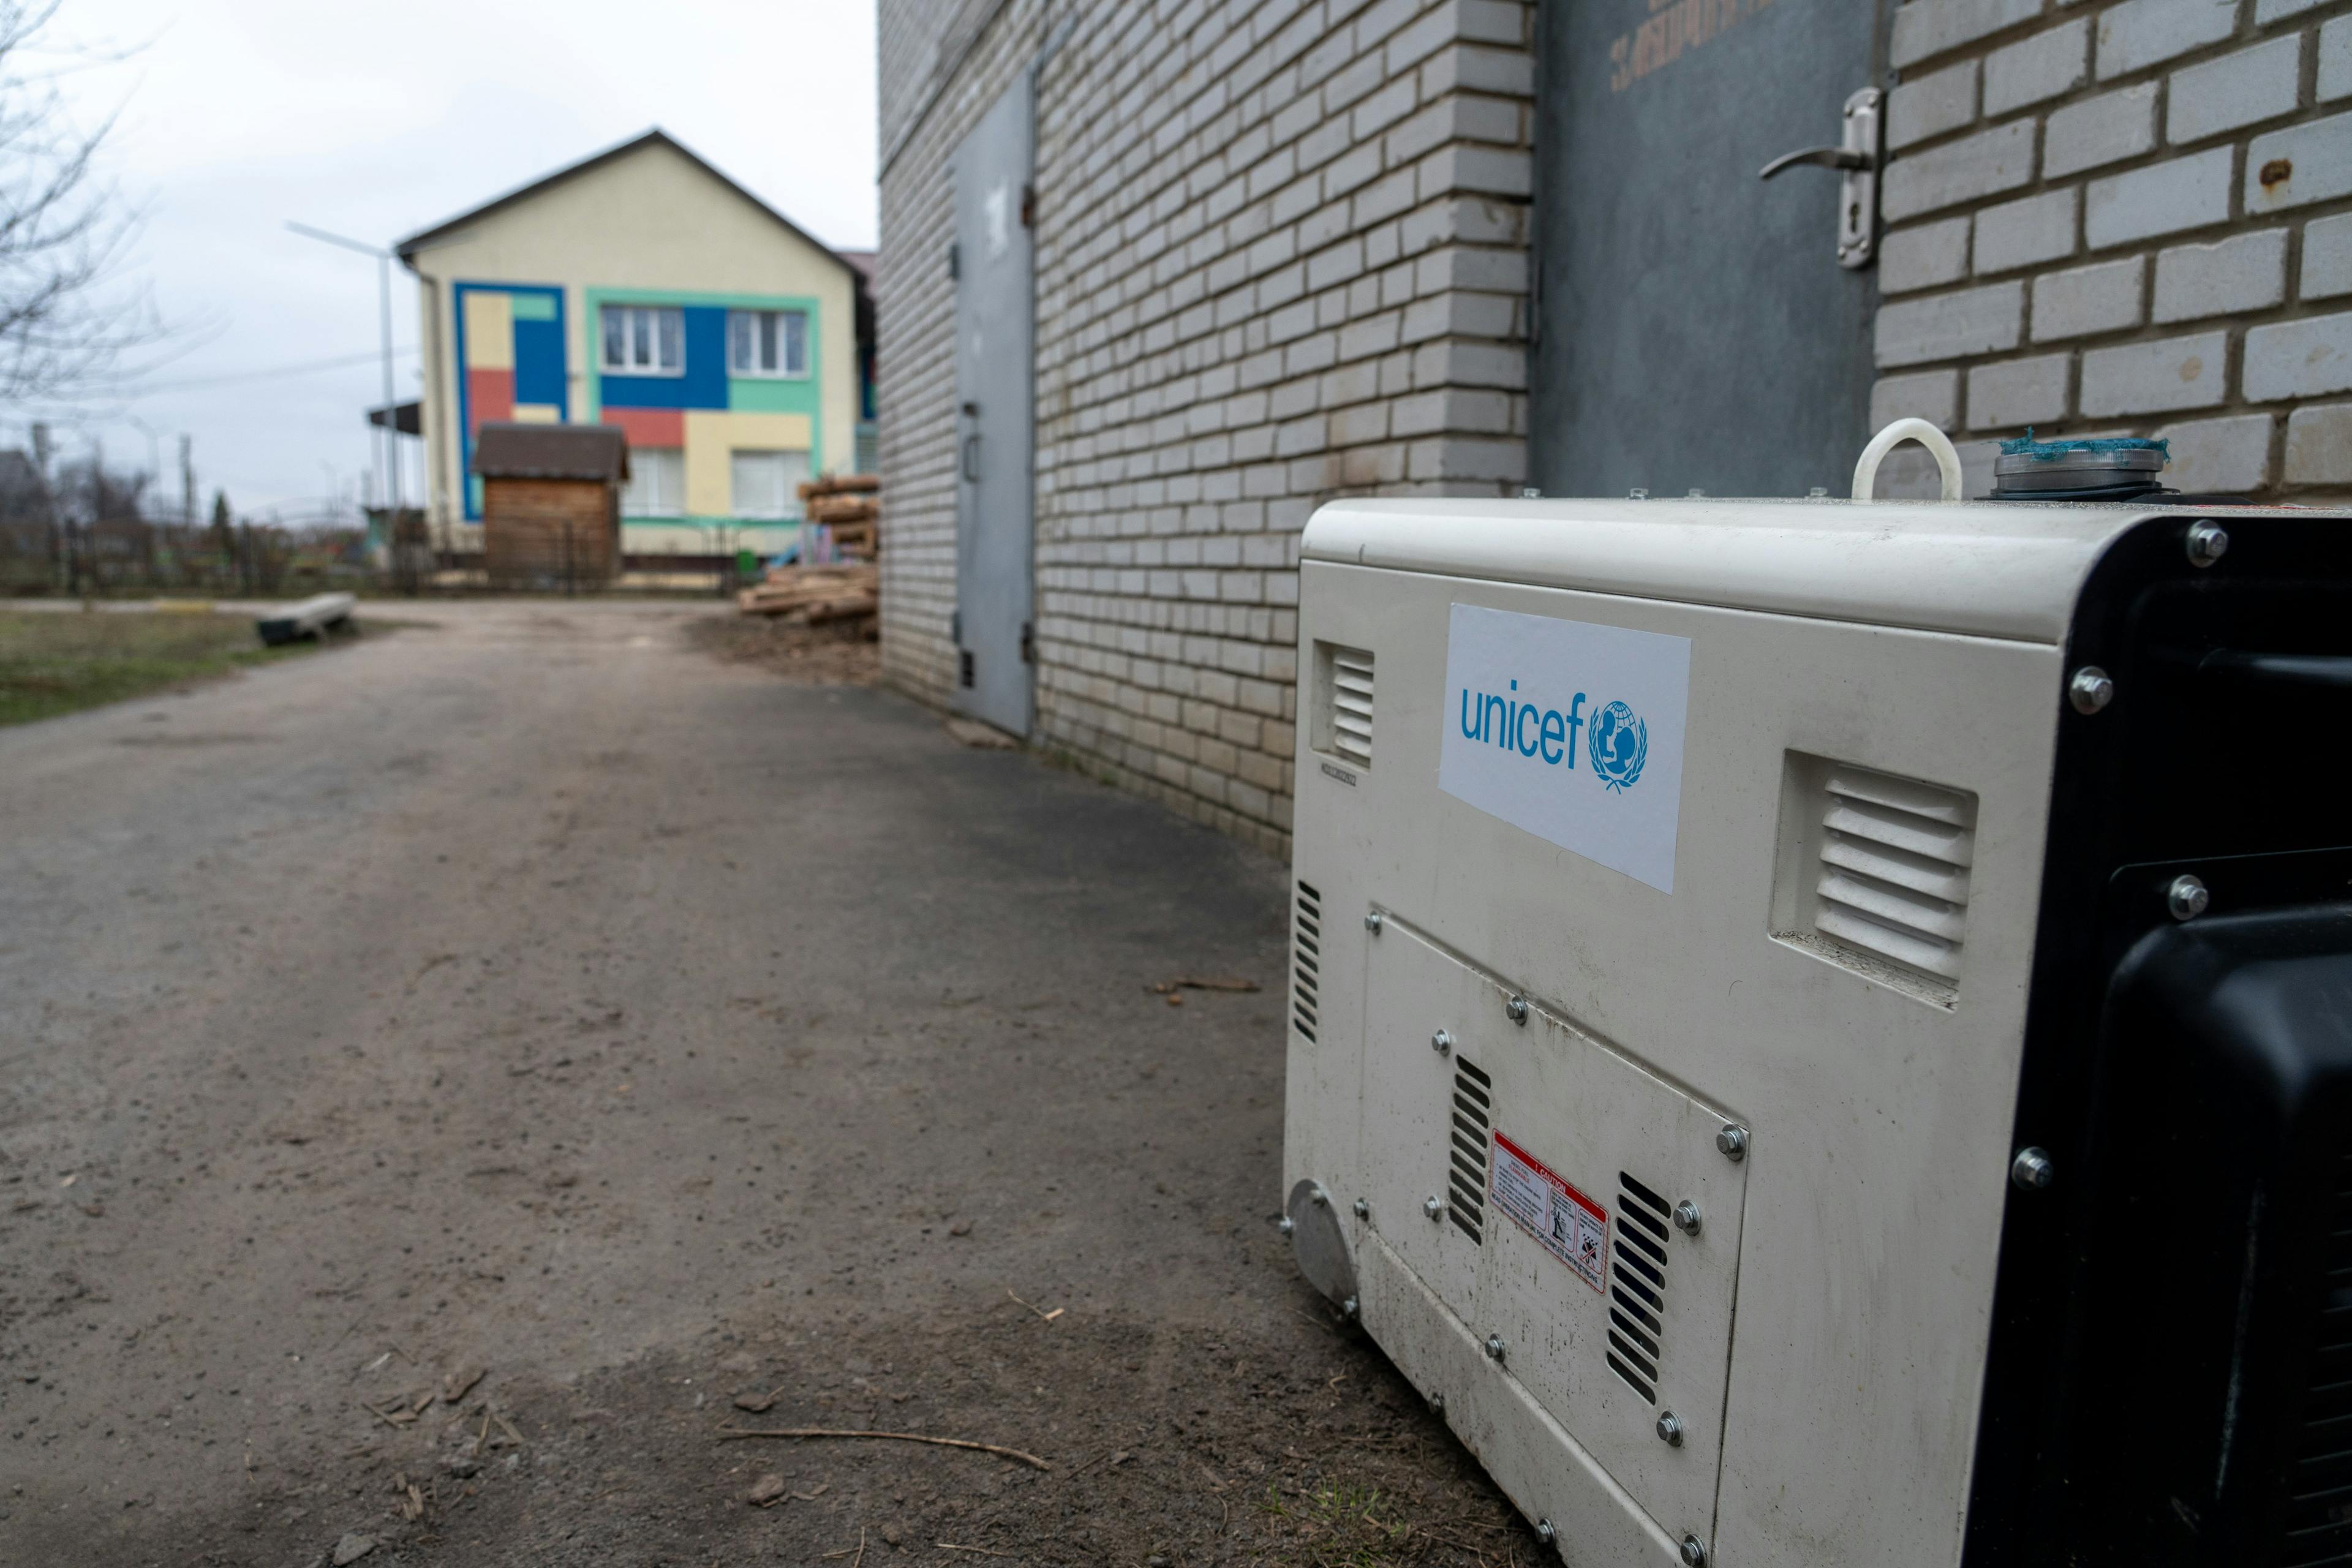 UNICEF is providing generators to educational facilities in Ukraine to ensure that children continue to have access to education.